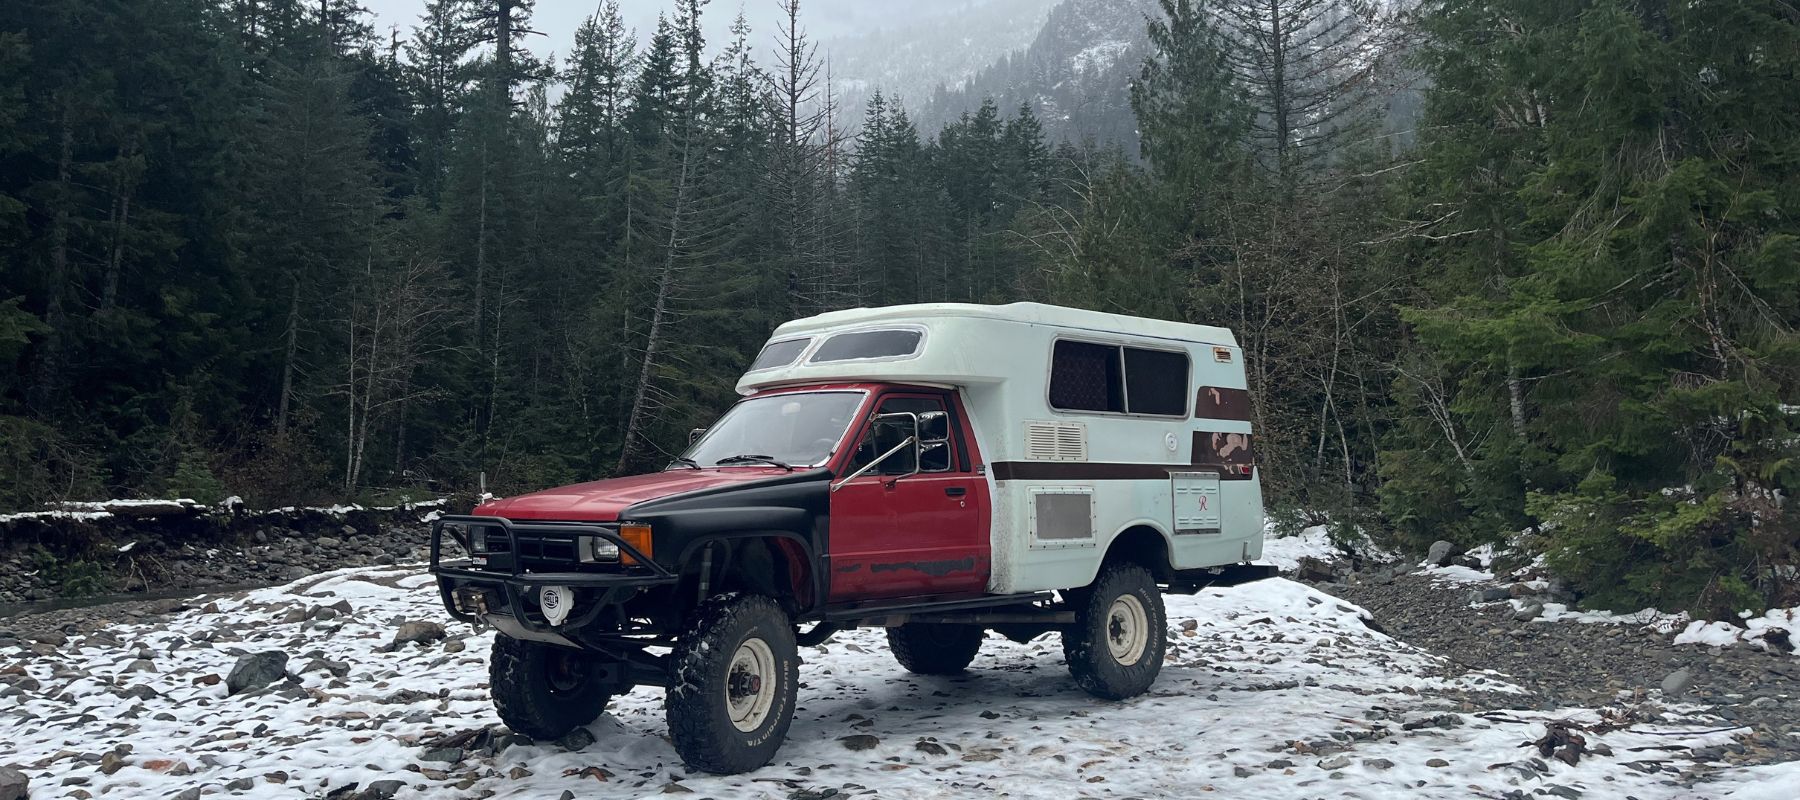 1985 Toyota Pickup Truck with Built in Camper parked on snowy lot